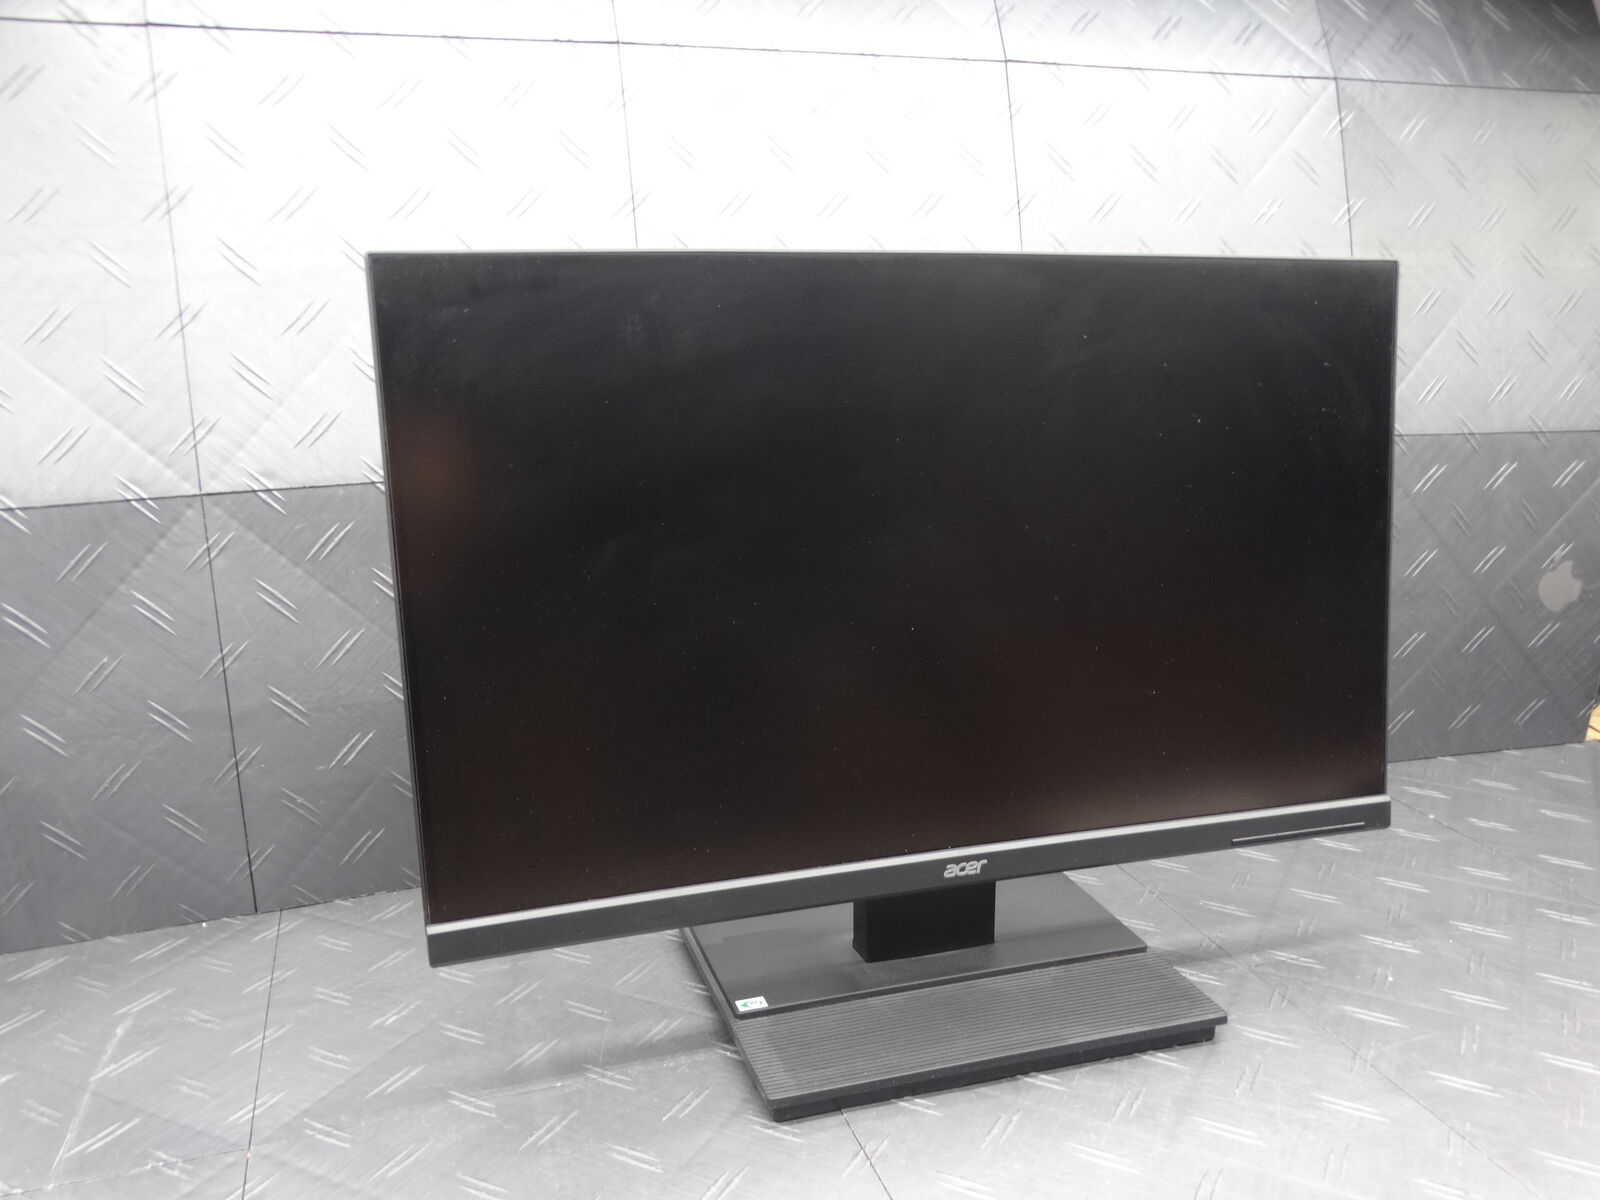 Acer V276HL 24in LCD Monitor 1920 x 1080p 60Hz Tested